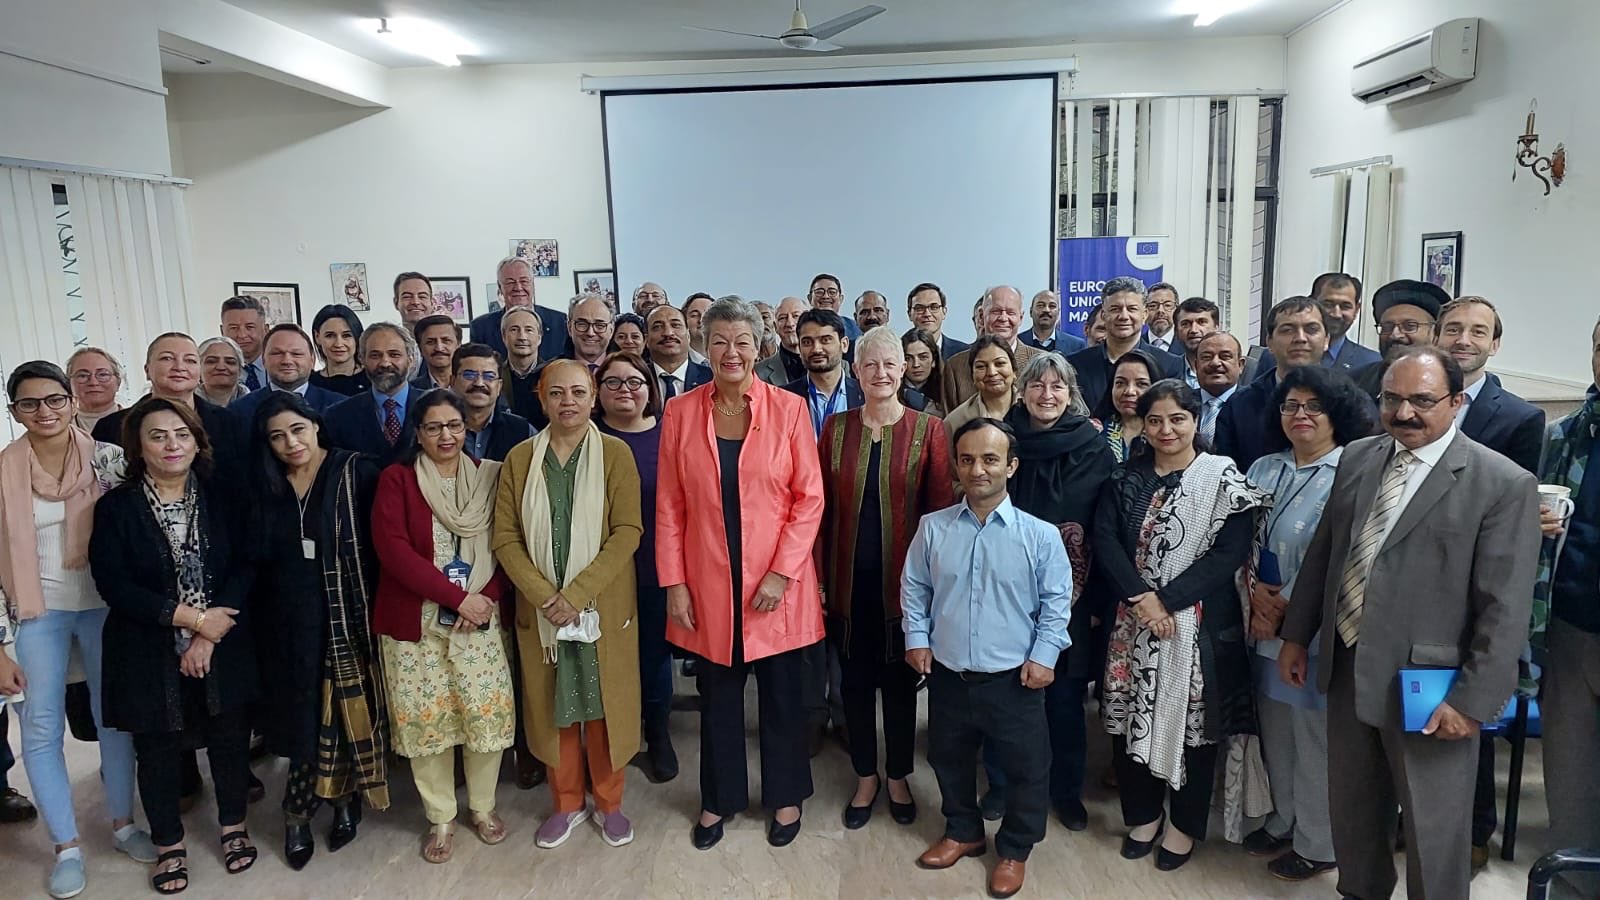 The staff of European Union in Pakistan with EU ambassador of Pakistan and Commission to Home Affairs, in Islamabad.